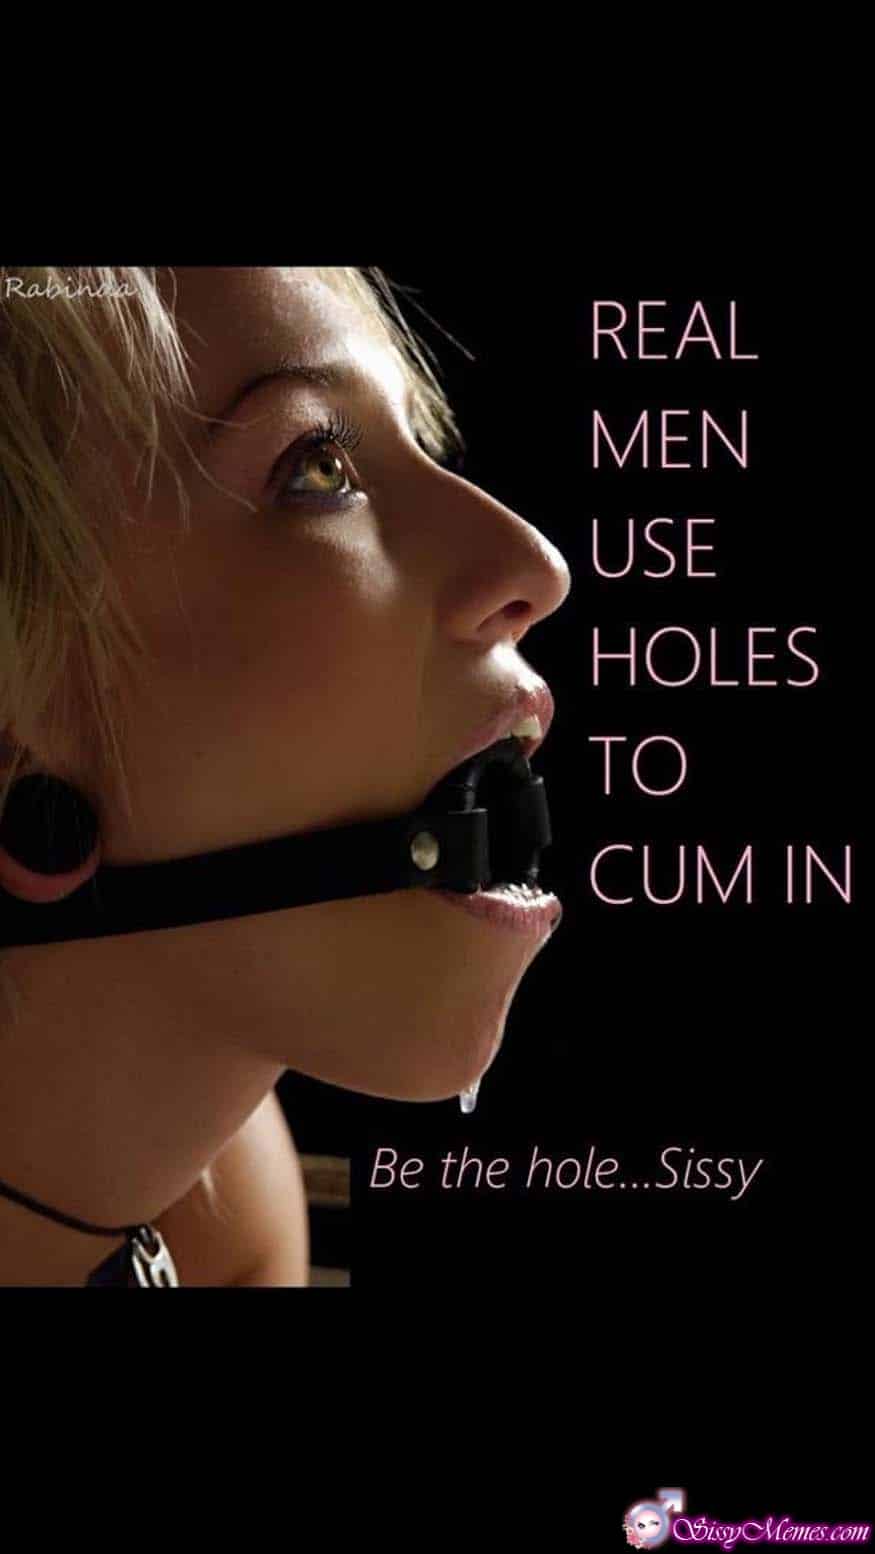 Training Sexy Hypno Forced hotwife caption: Rabinda REAL MEN USE HOLES TO CUM IN Be the hole….Sissy Ball Gagged Femboy